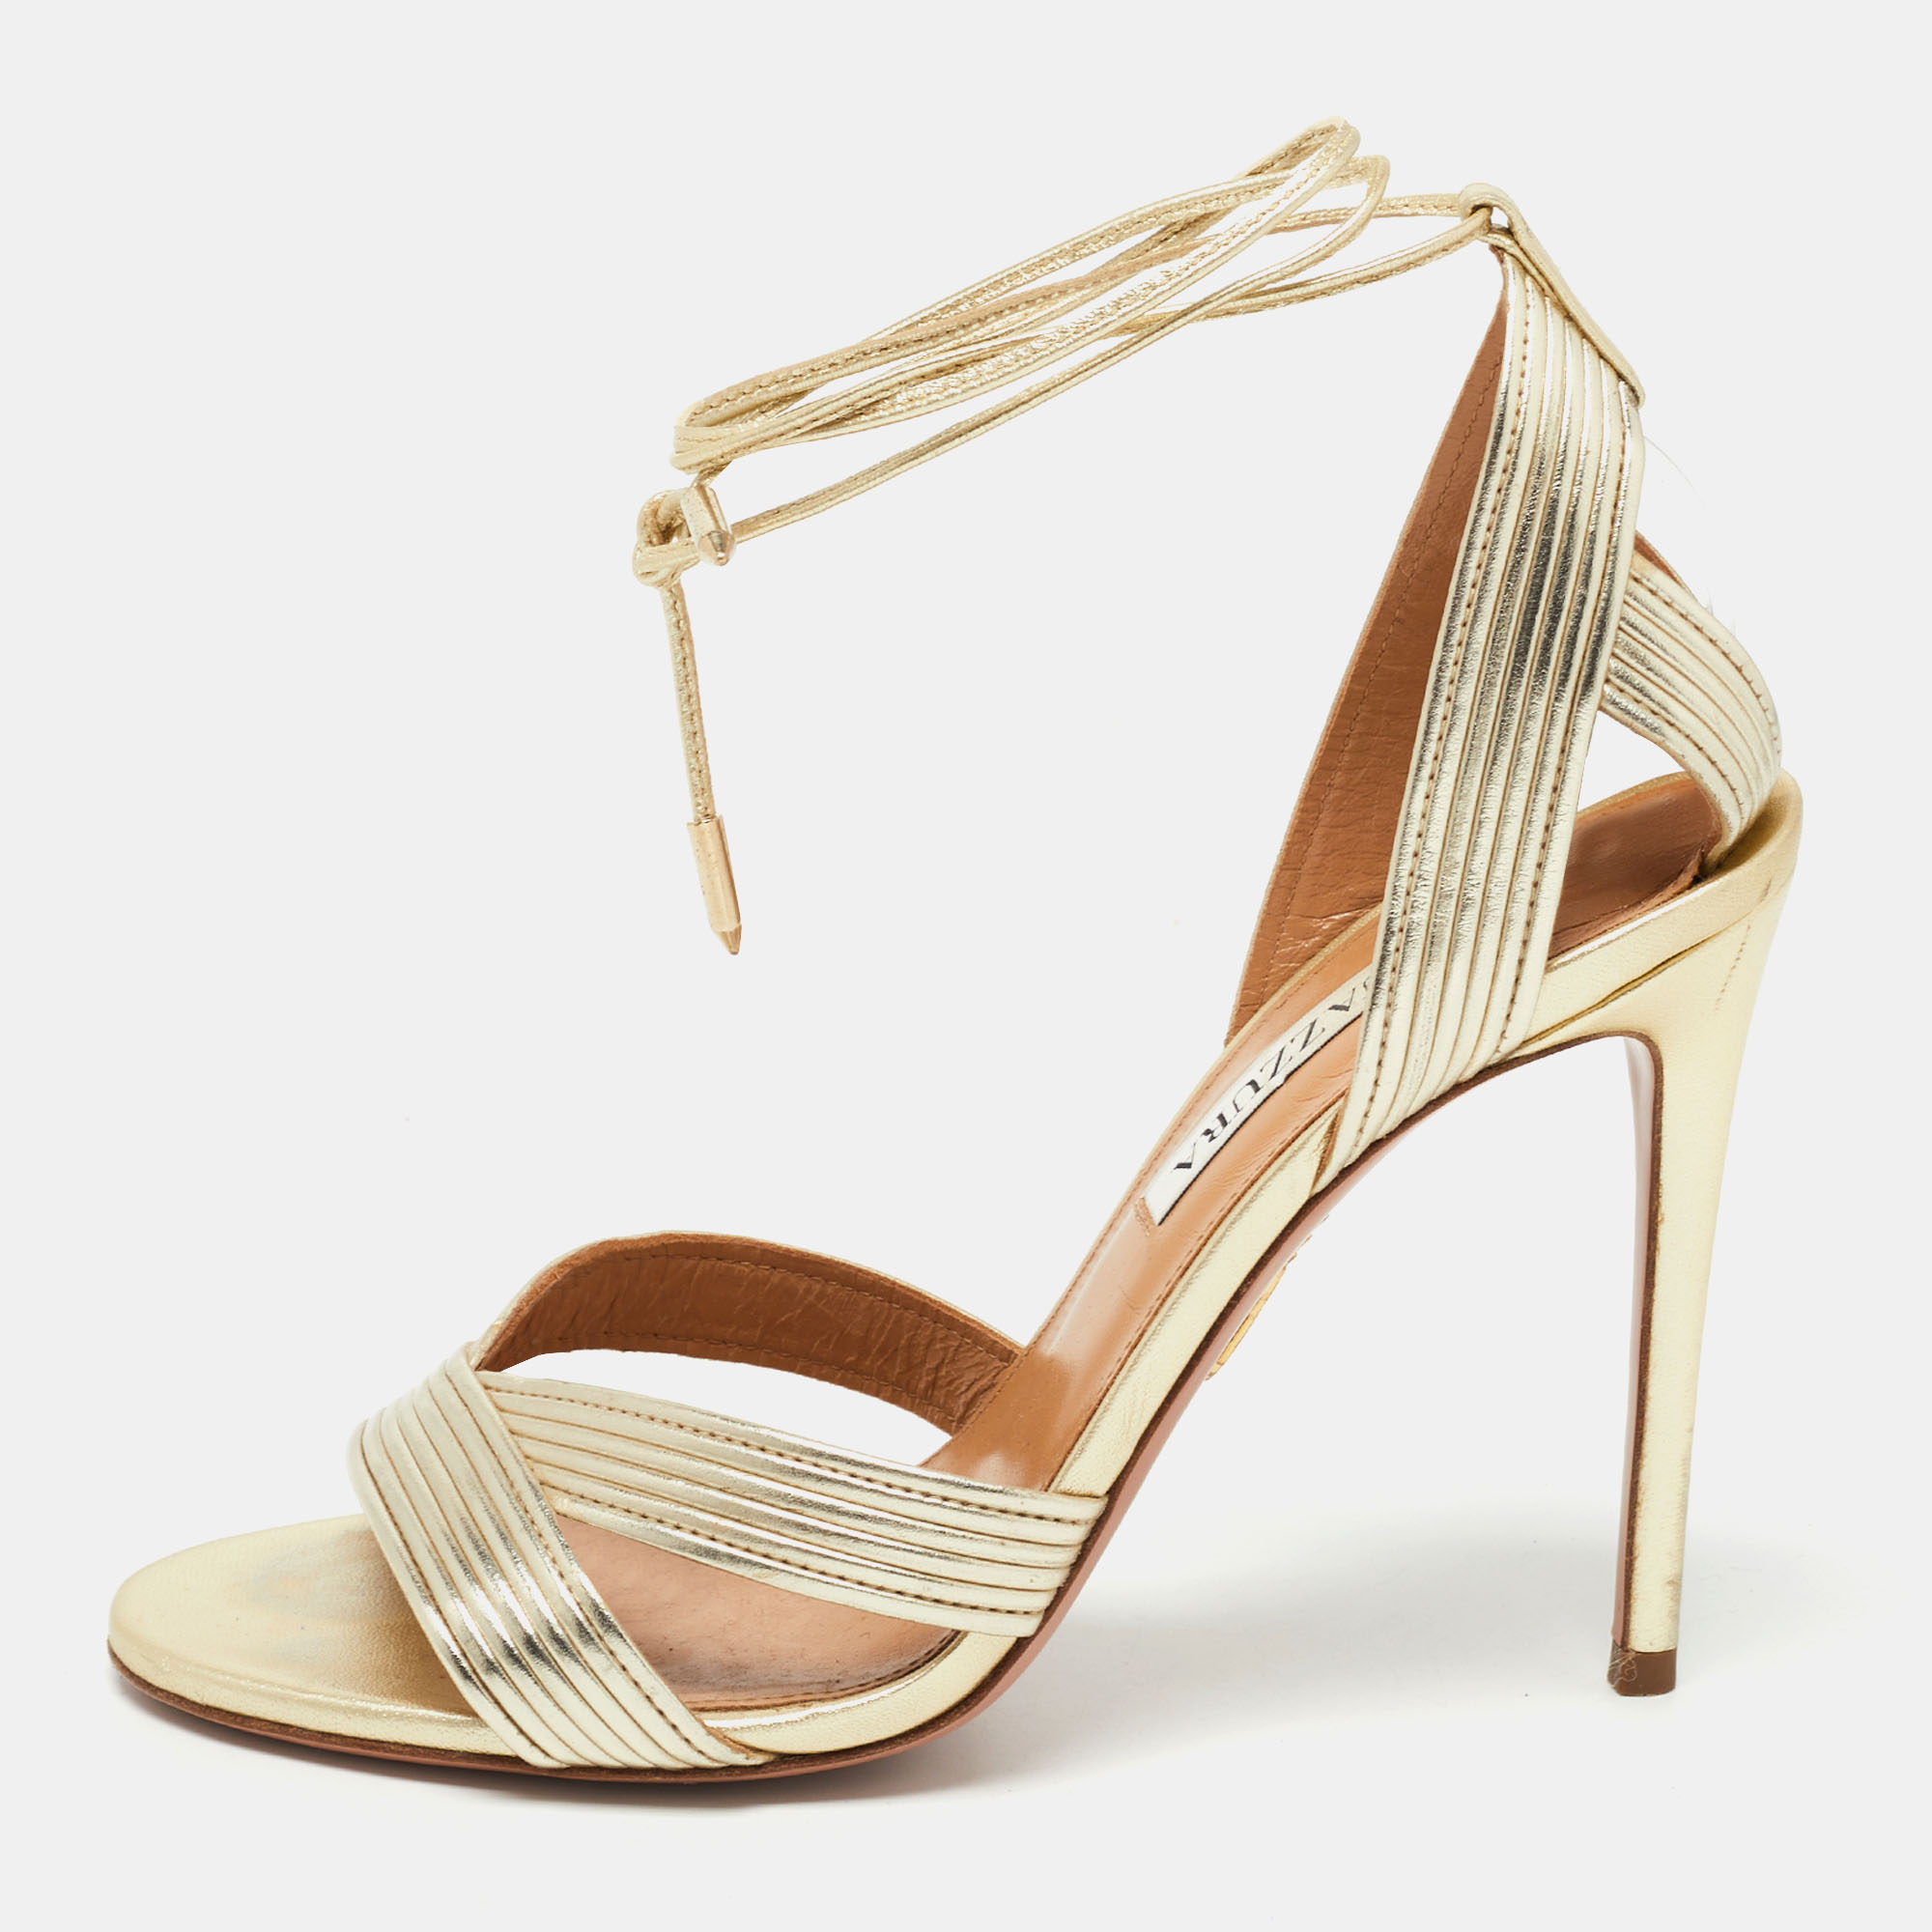 AQUAZZURA Pre-owned Metallic Gold Leather Nathalie Ankle Wrap Sandals Size 37